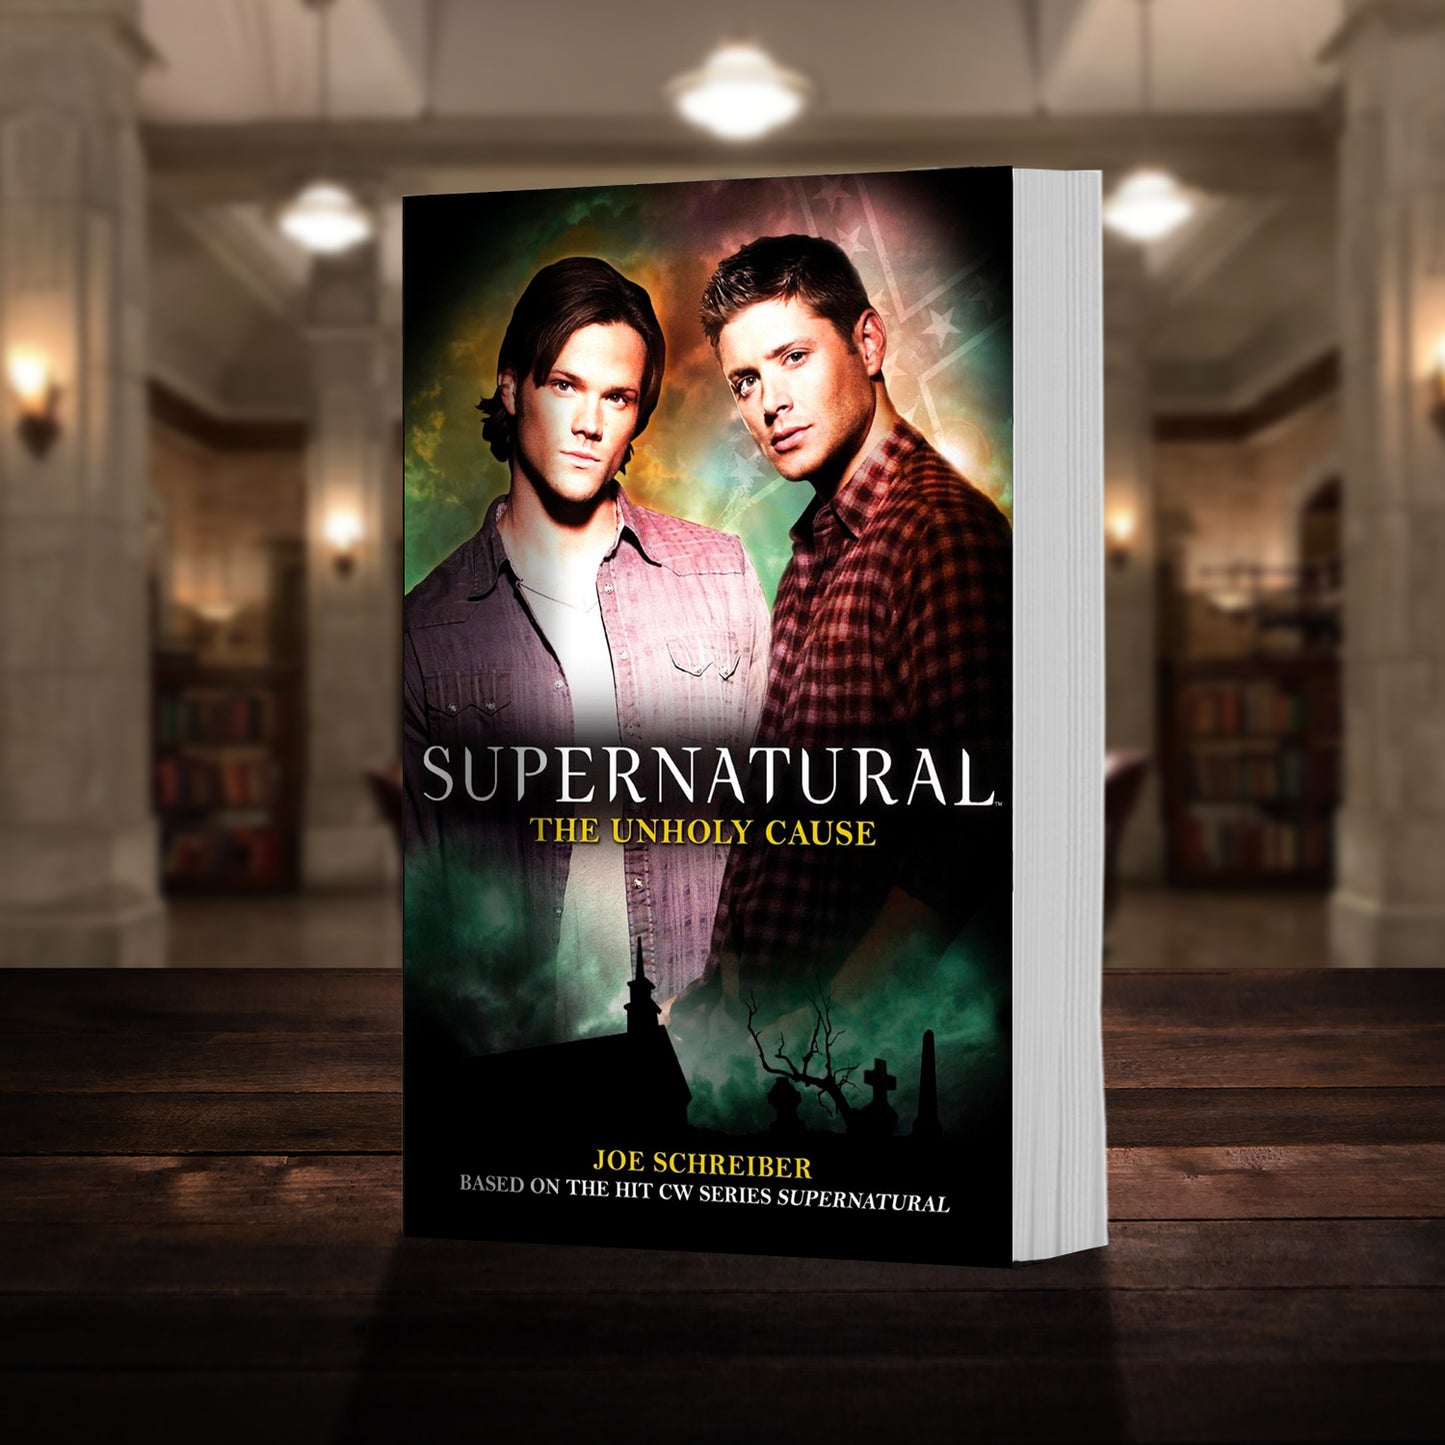 A copy of the book "Supernatural: The Unholy Cause" pictured in the "bunker" from Supernatural. The cover shows early-season Sam and Dean Winchester and reads "Supernatural The Unholy Cause - Based on the hit CW series SUPERNATURAL by Joe Schreiber”